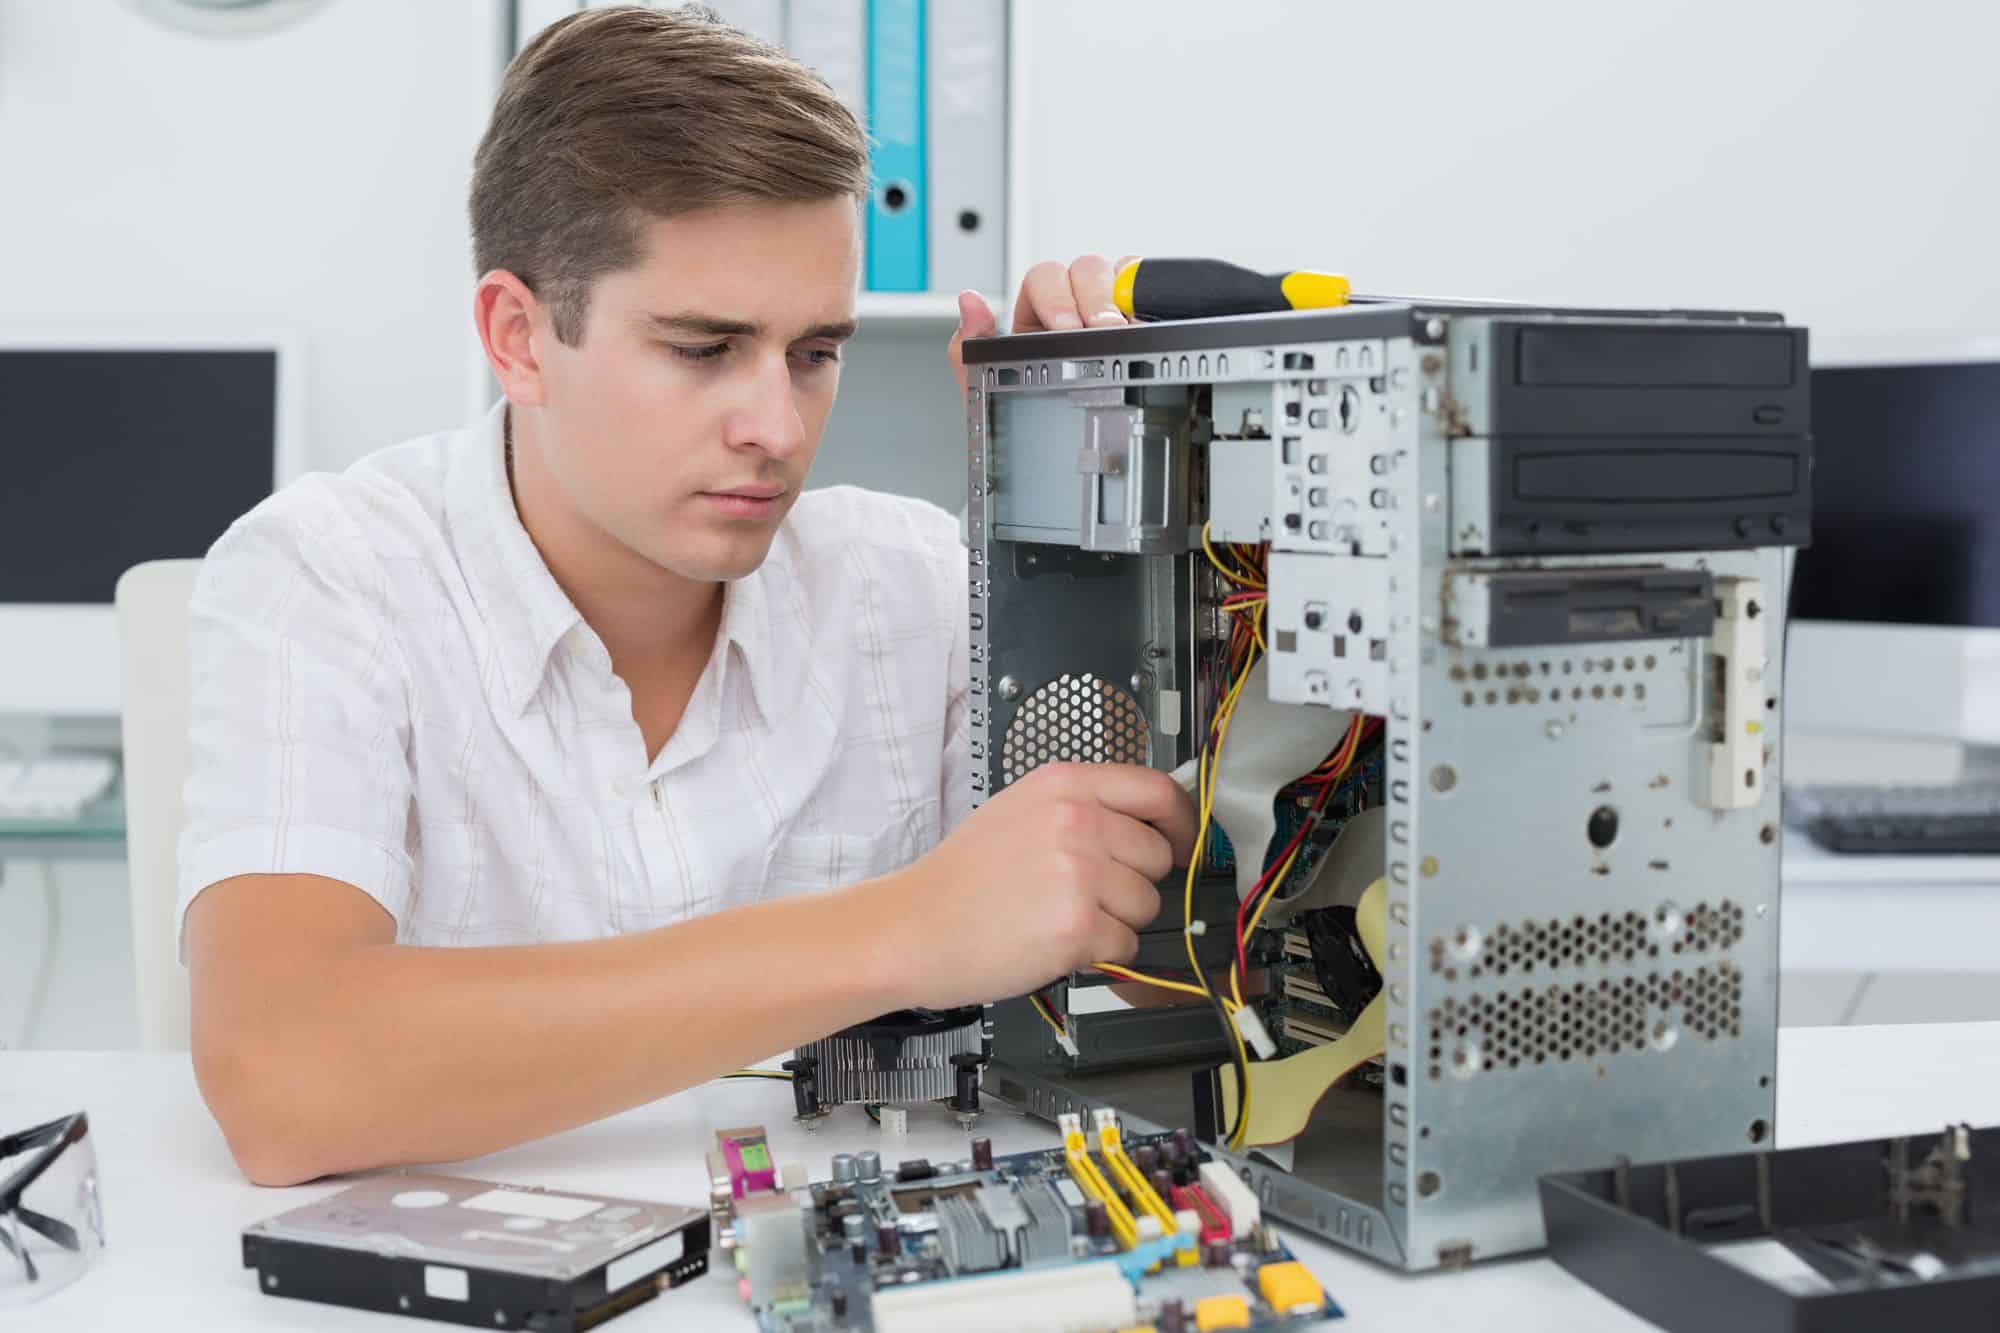 An IT guy fixing a computer.